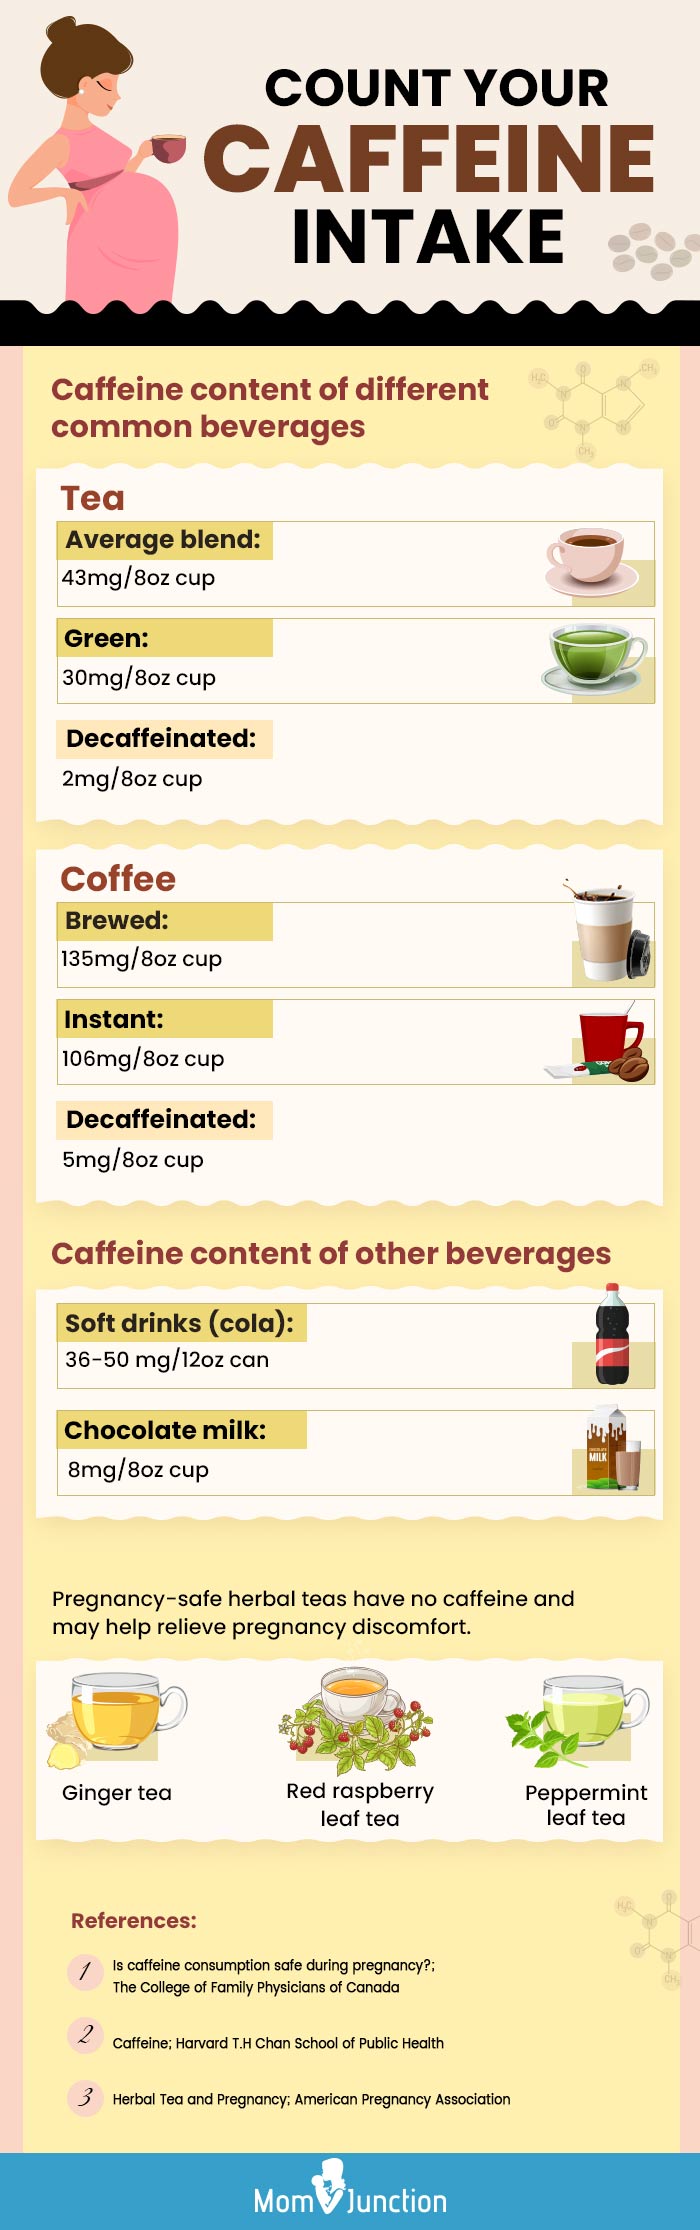 count your caffeine intake [infographic]